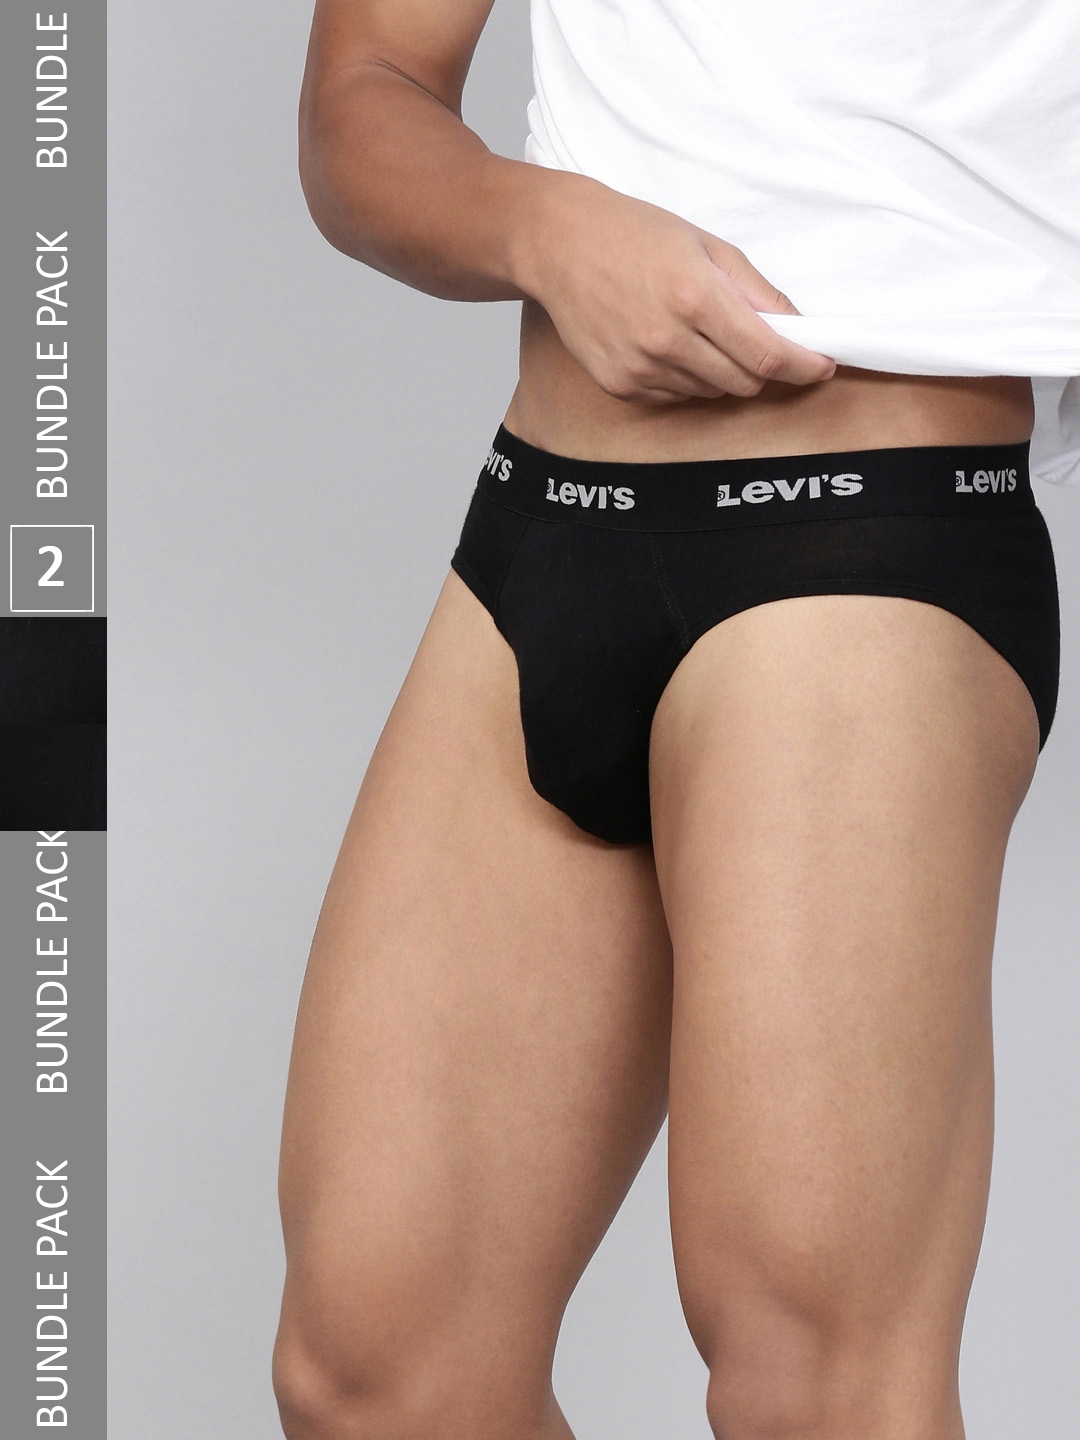 Buy Levis Pack Of 2 Smartskin Technology Neo Briefs With Tag Free